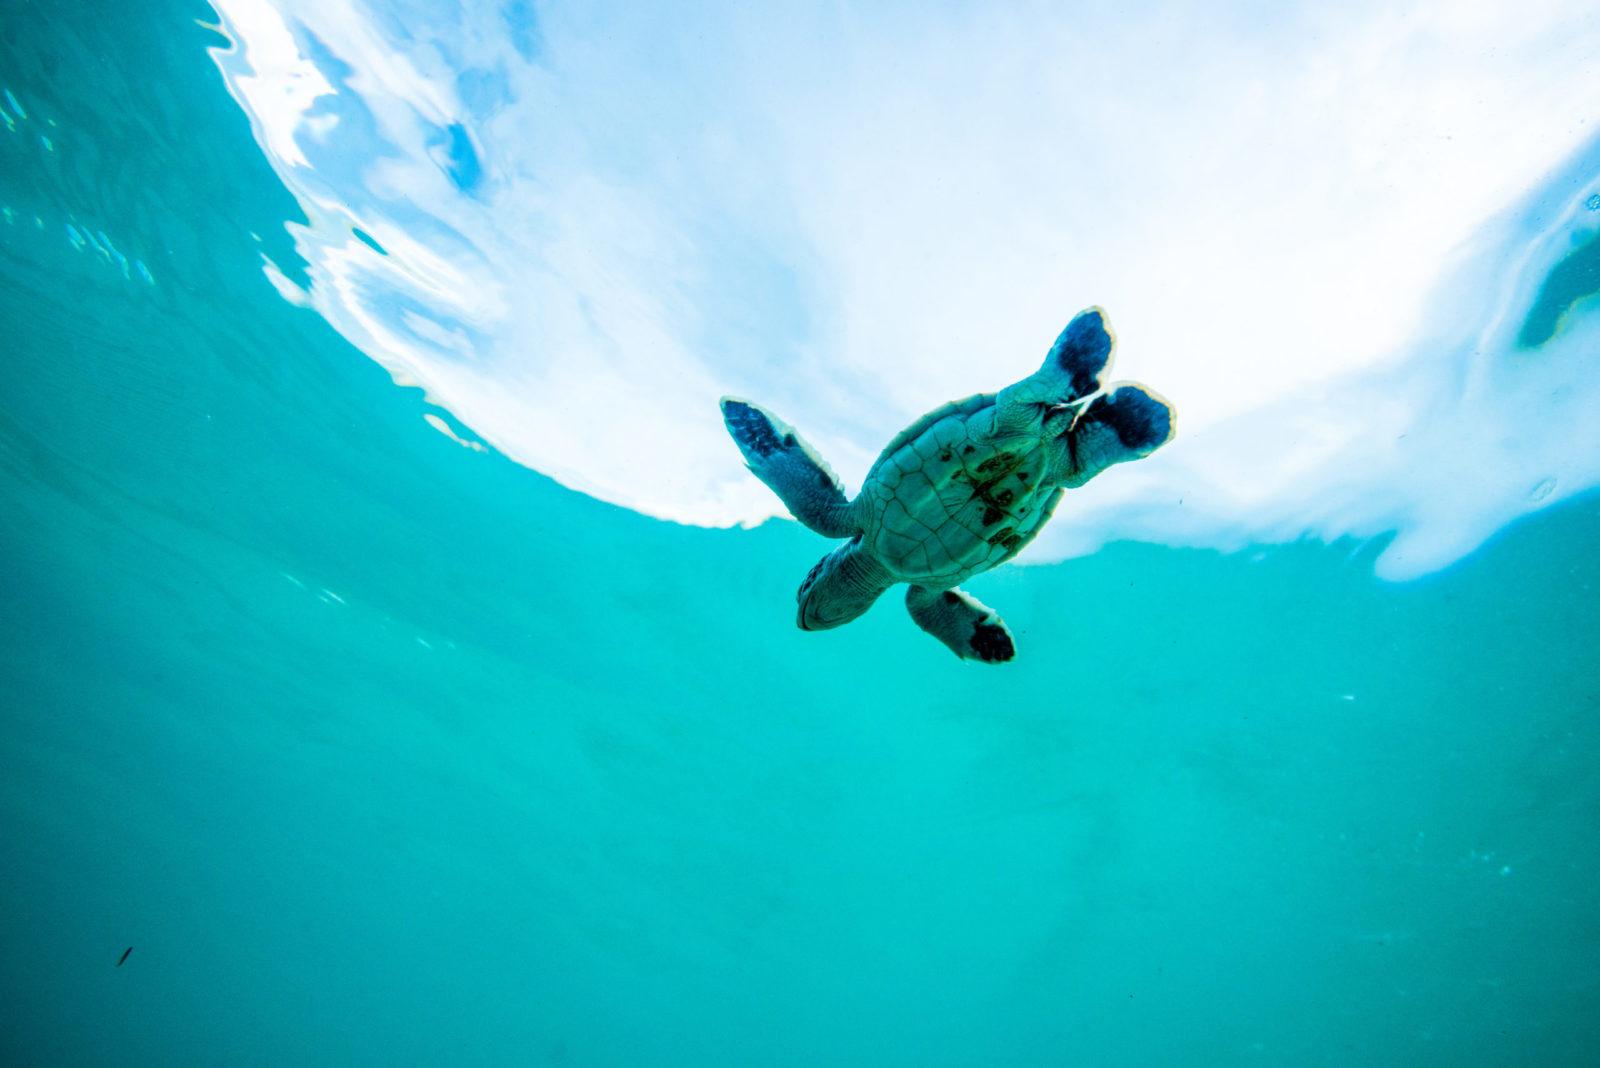 640,000 More endangered Baby Turtles on the Great Barrier Reef